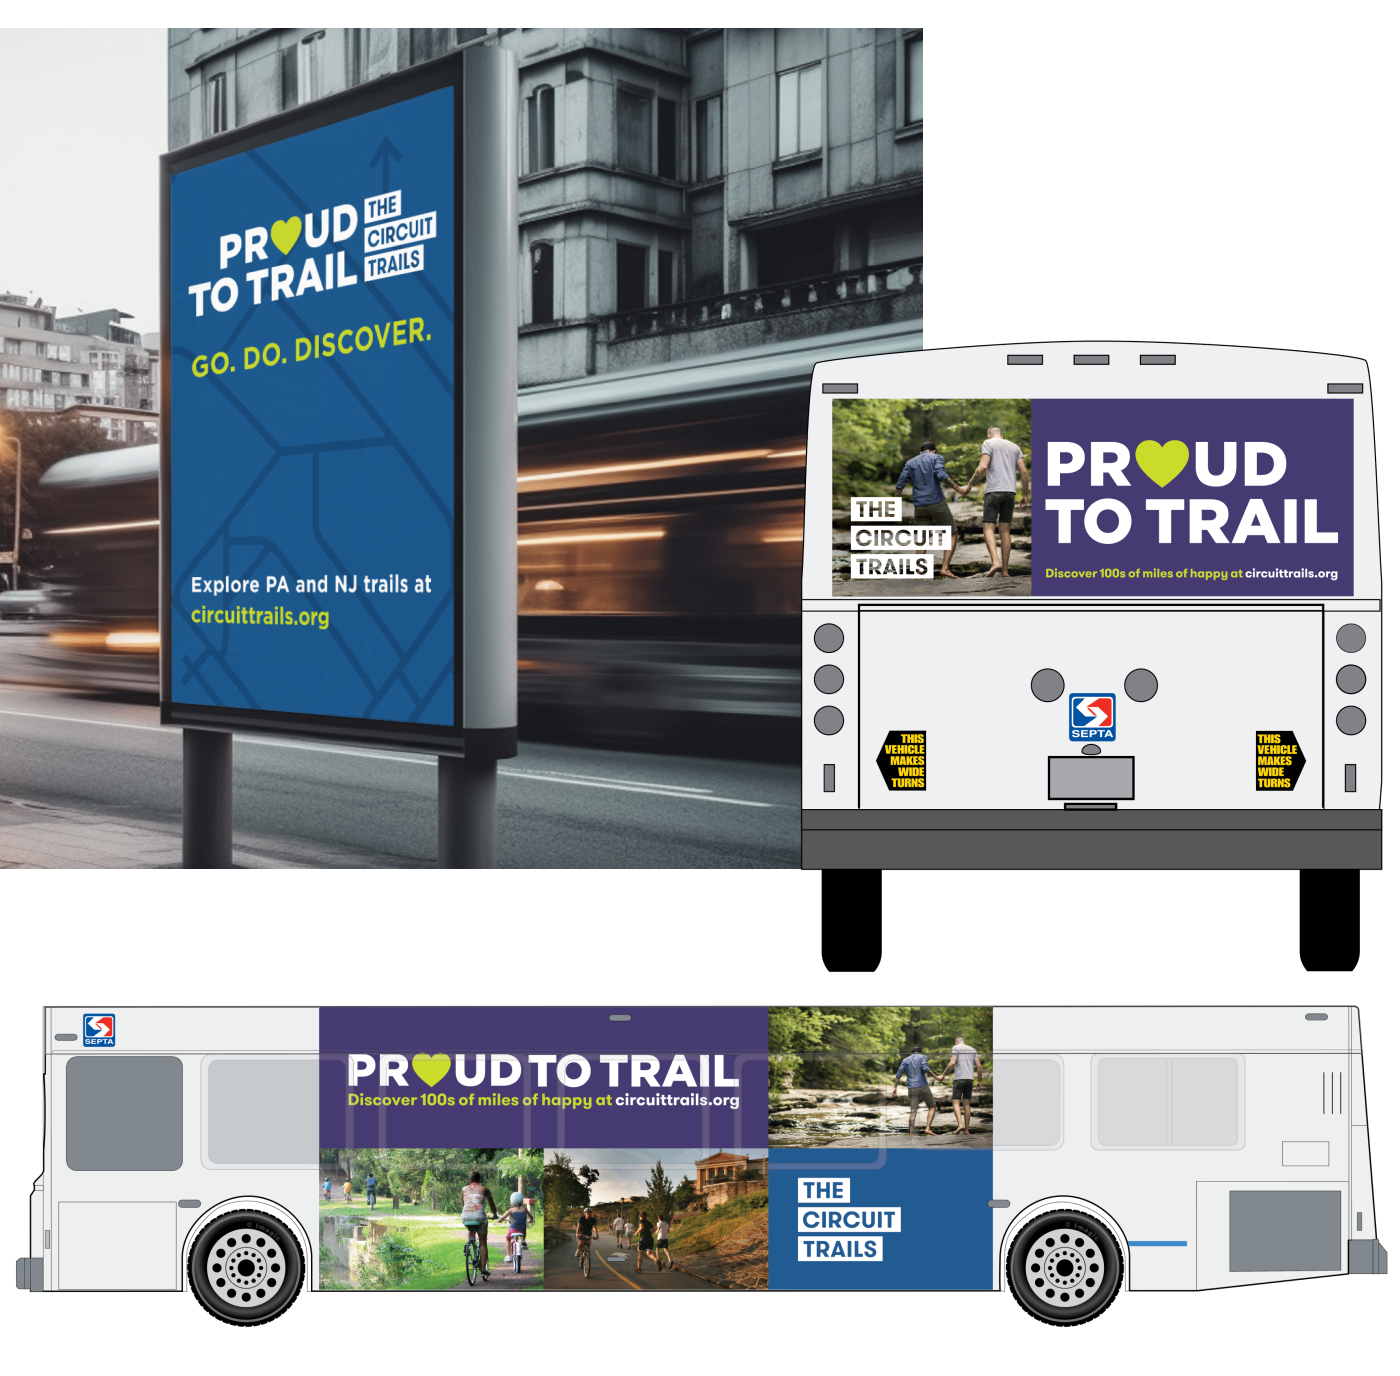 Bus Ads showing Circuit Trails Logo on the side and back of bus as well as bus stop ad.